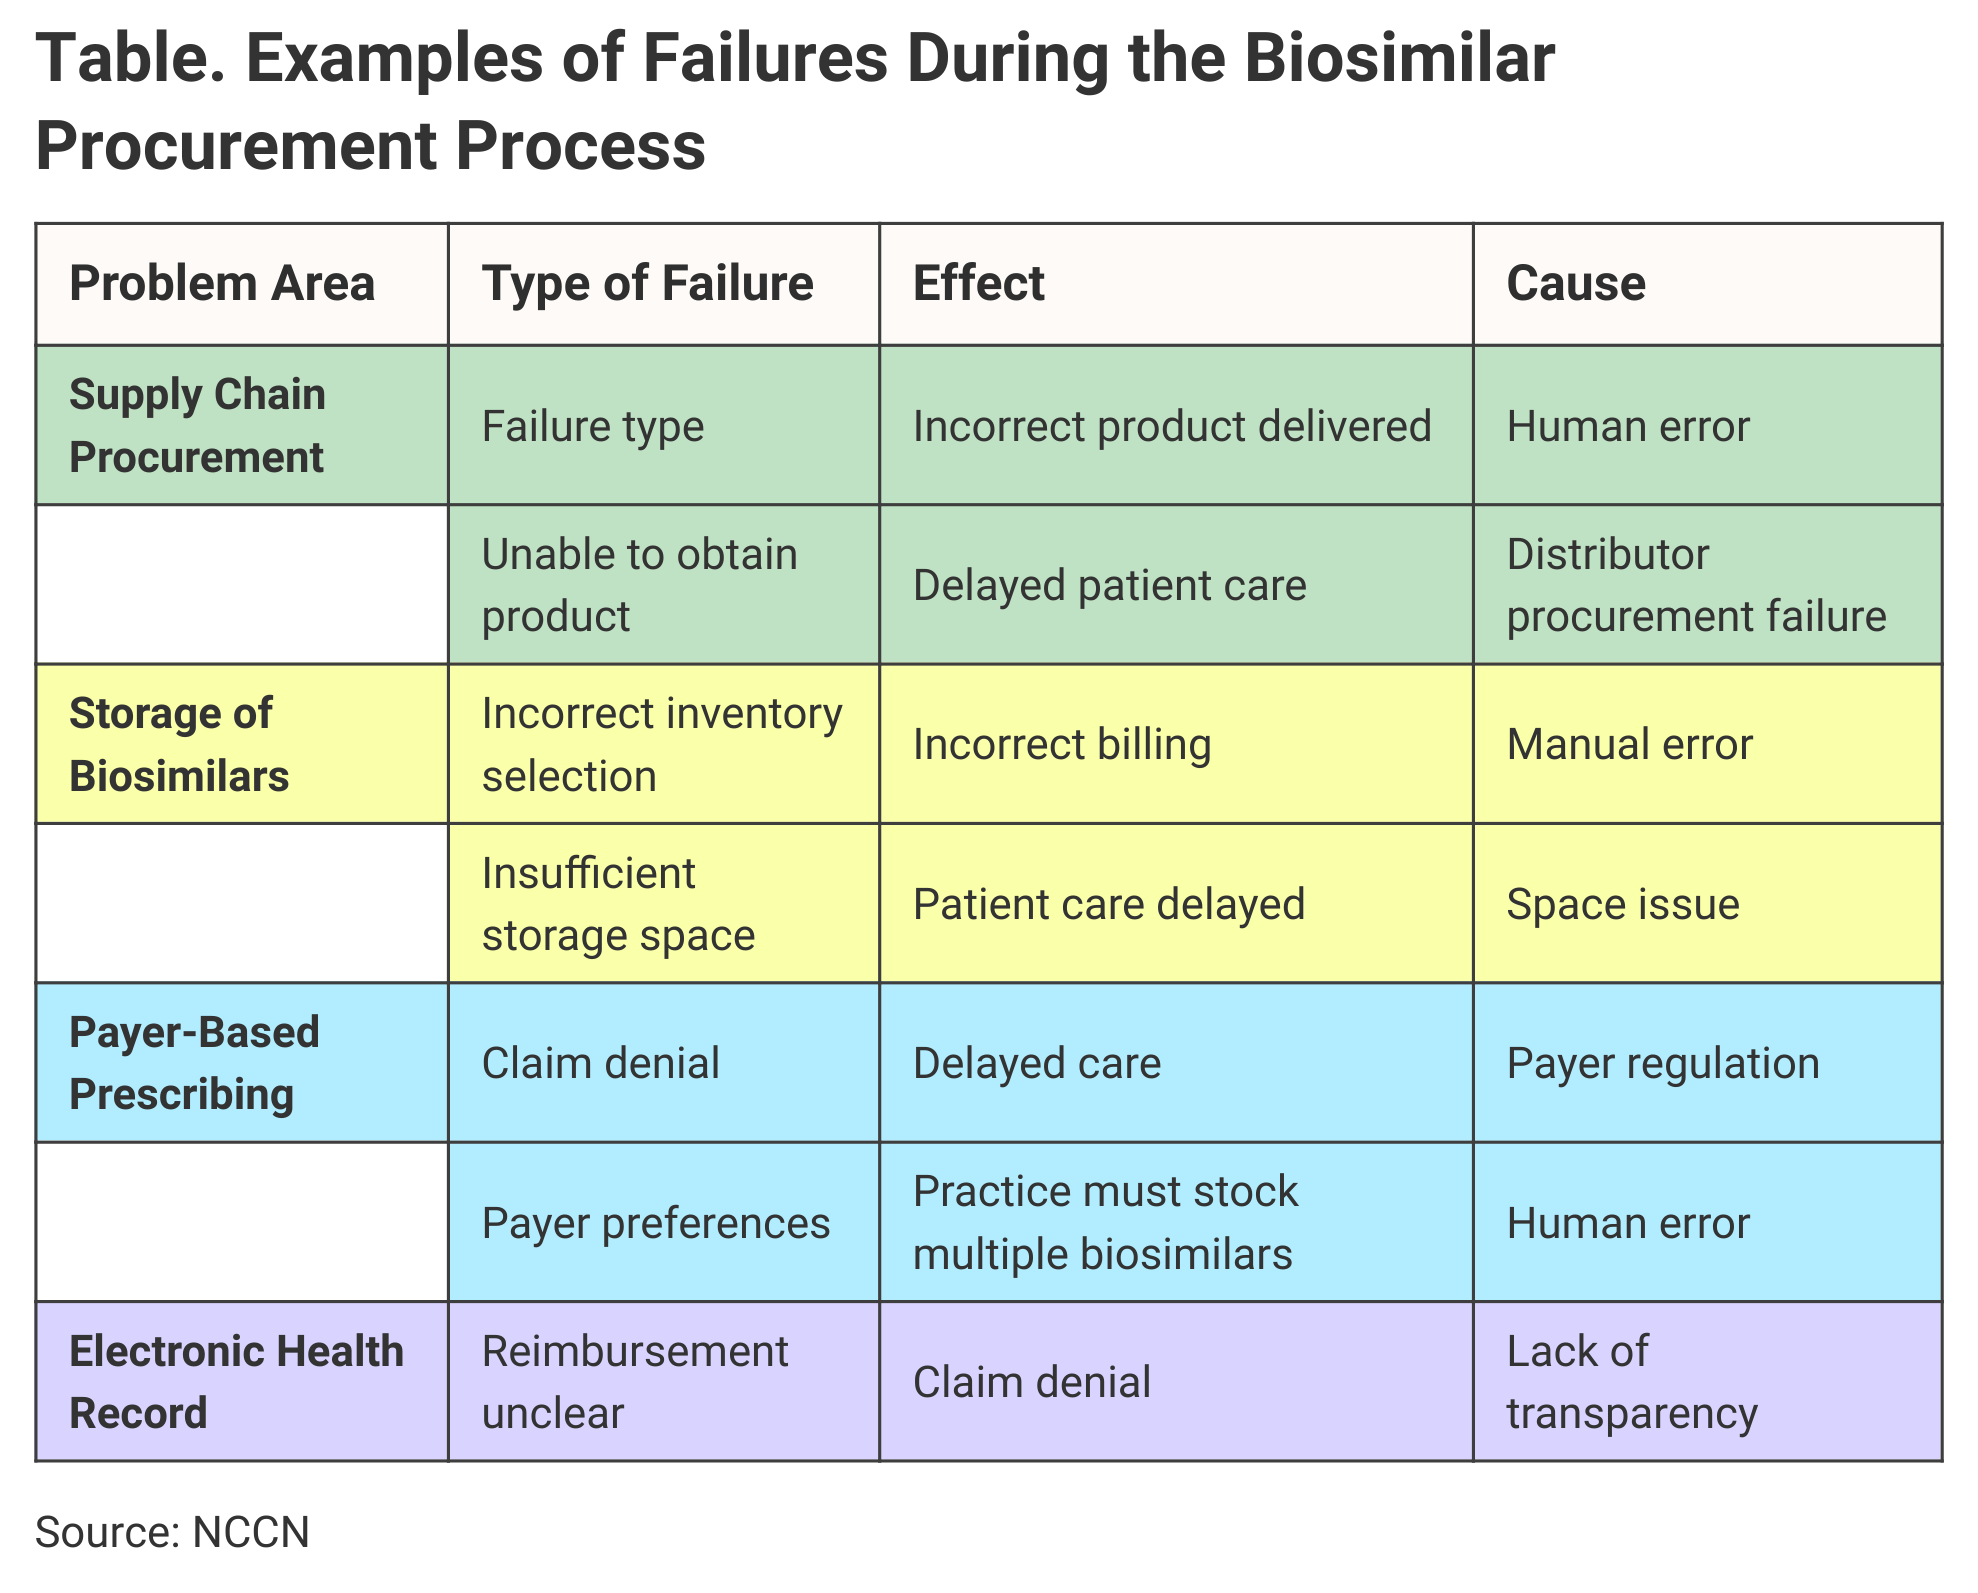 Table. Examples of Failures During the Biosimilar Procurement Process